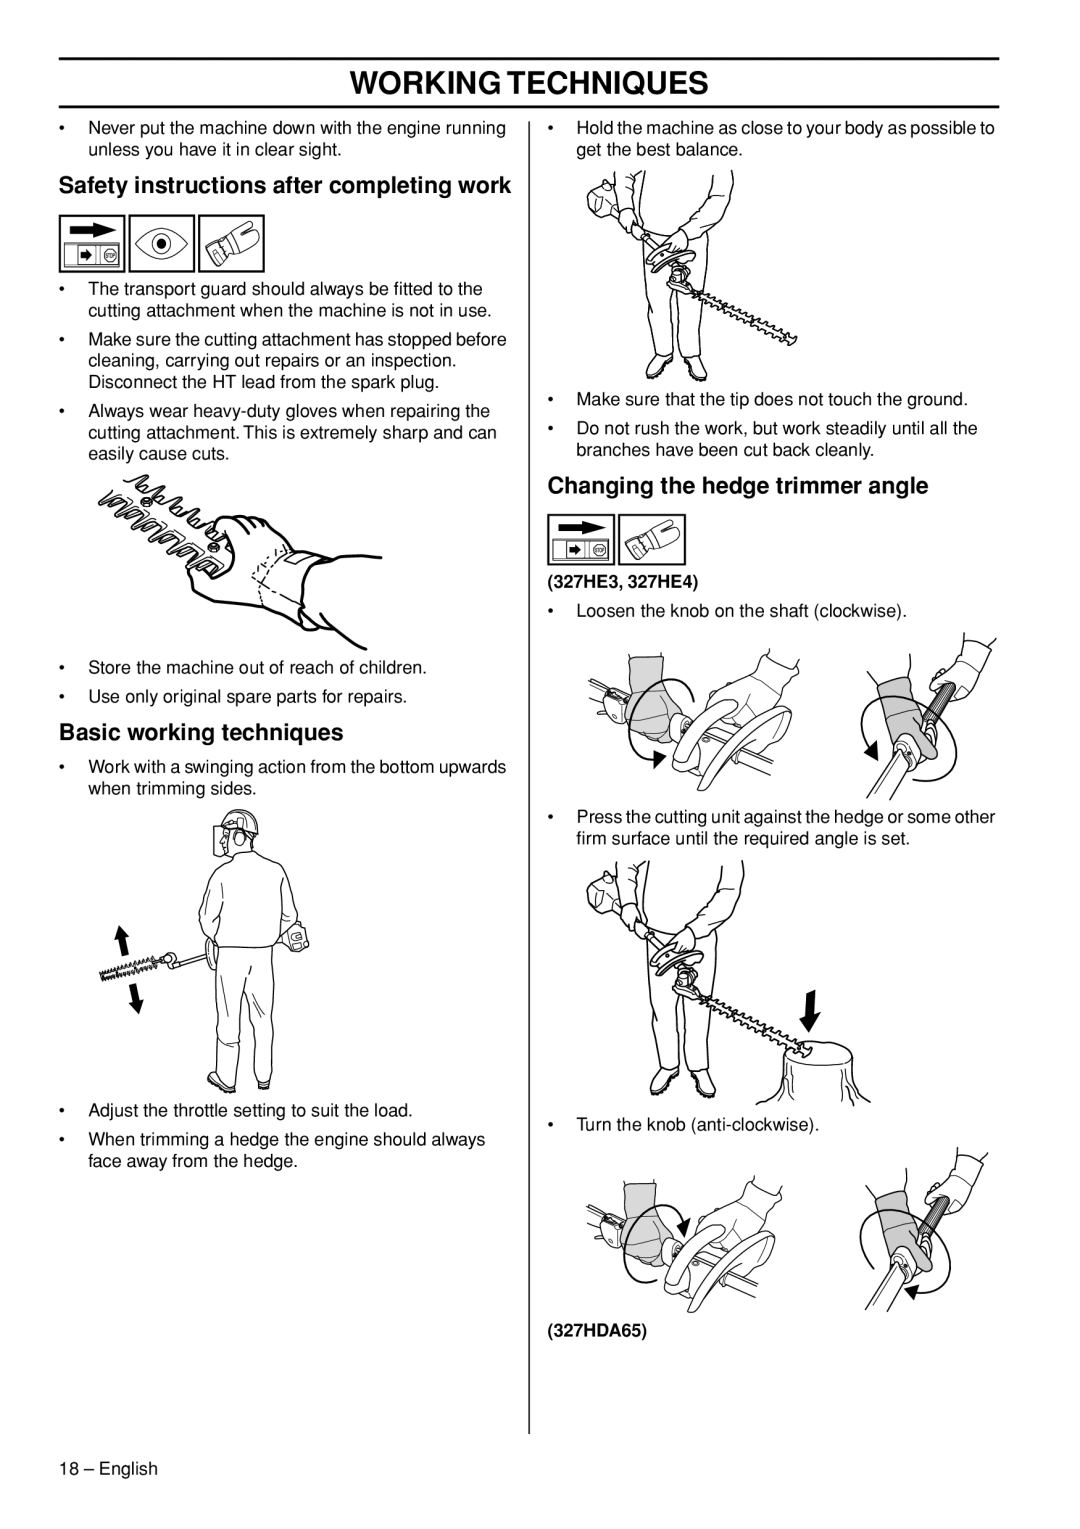 Husqvarna 327HDA65x series manual Safety instructions after completing work, Basic working techniques, Working Techniques 